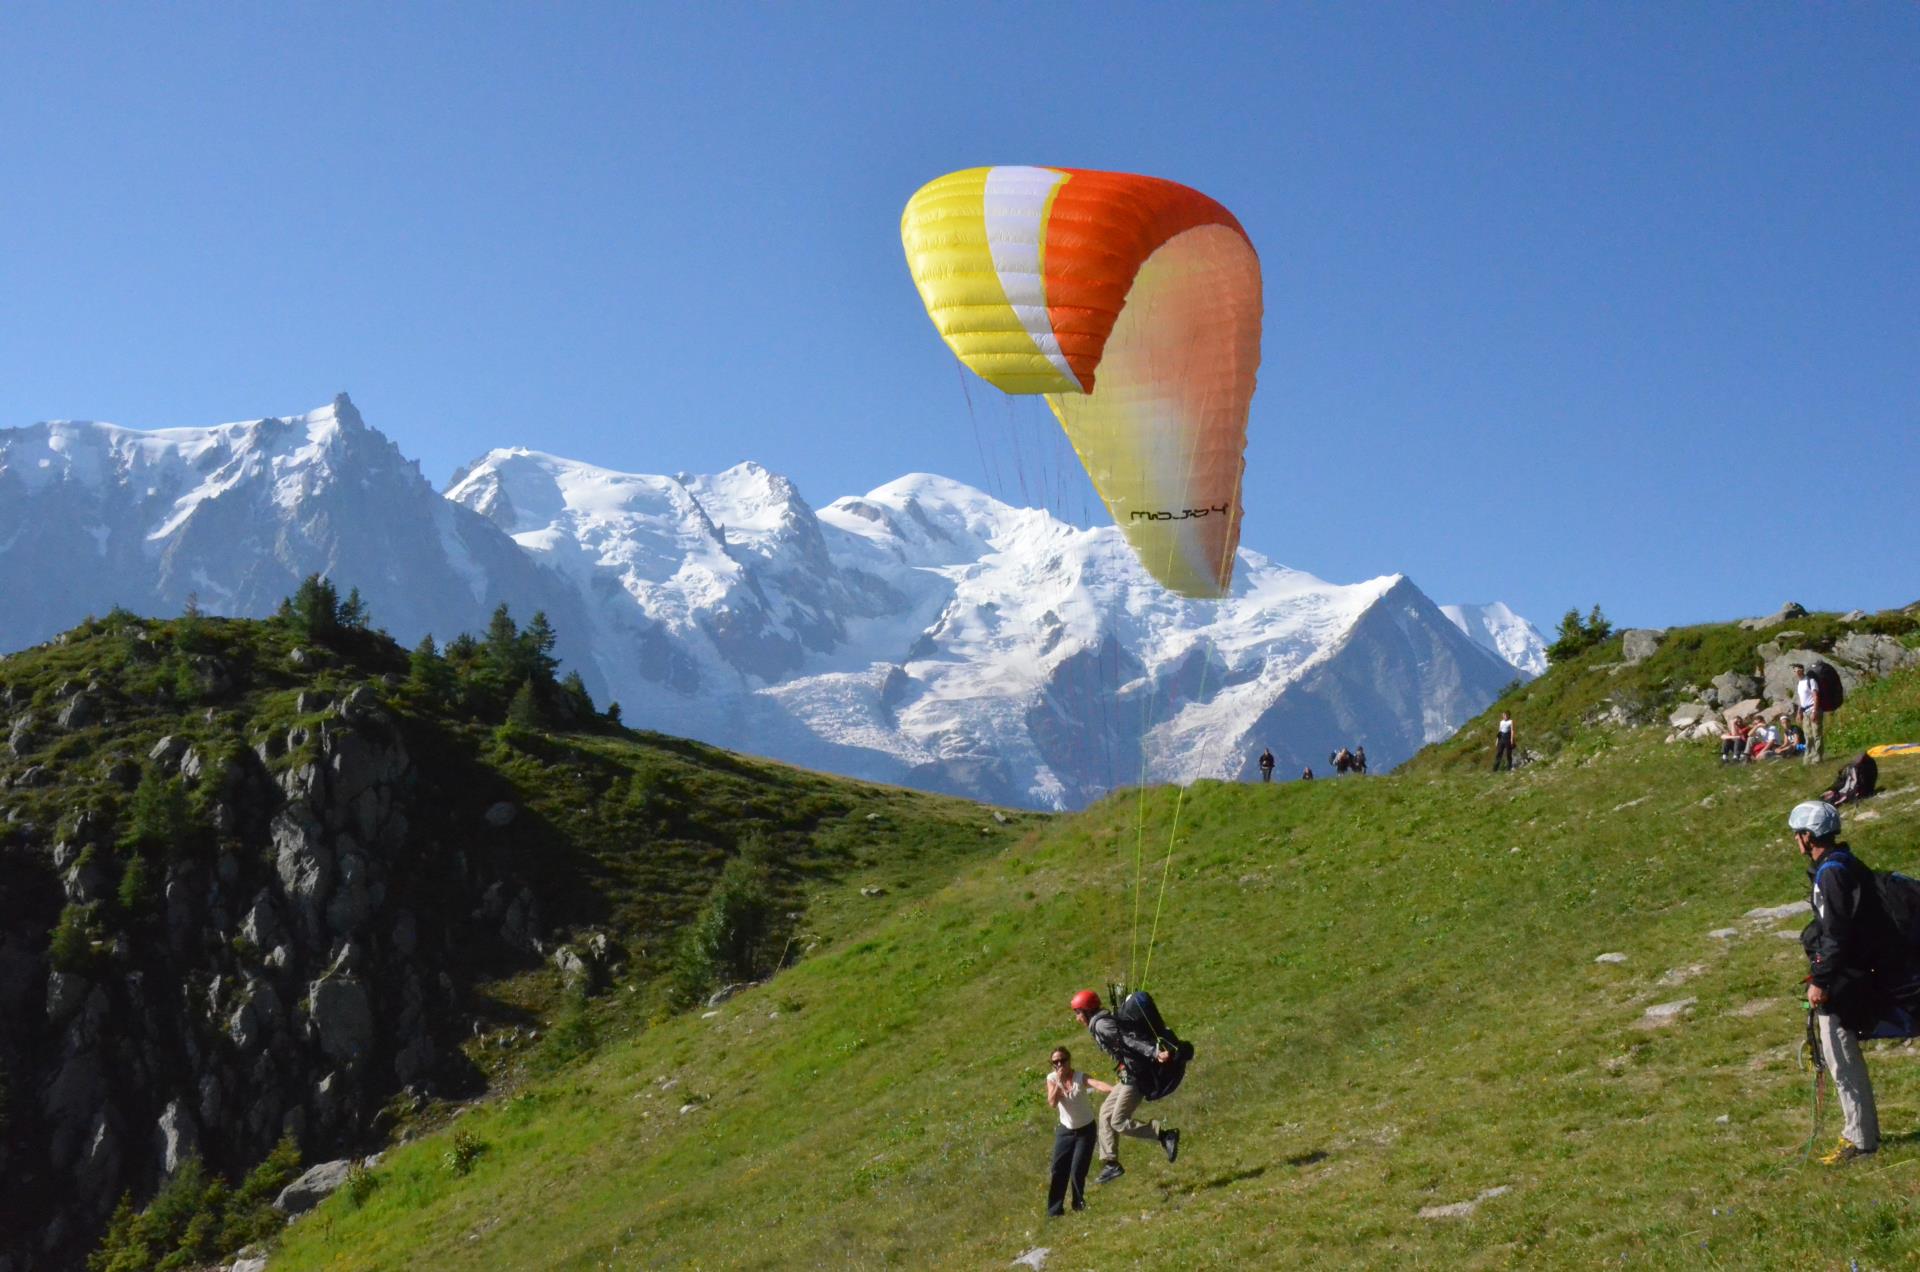 Paragliding in Chamonix - A Family Adventure